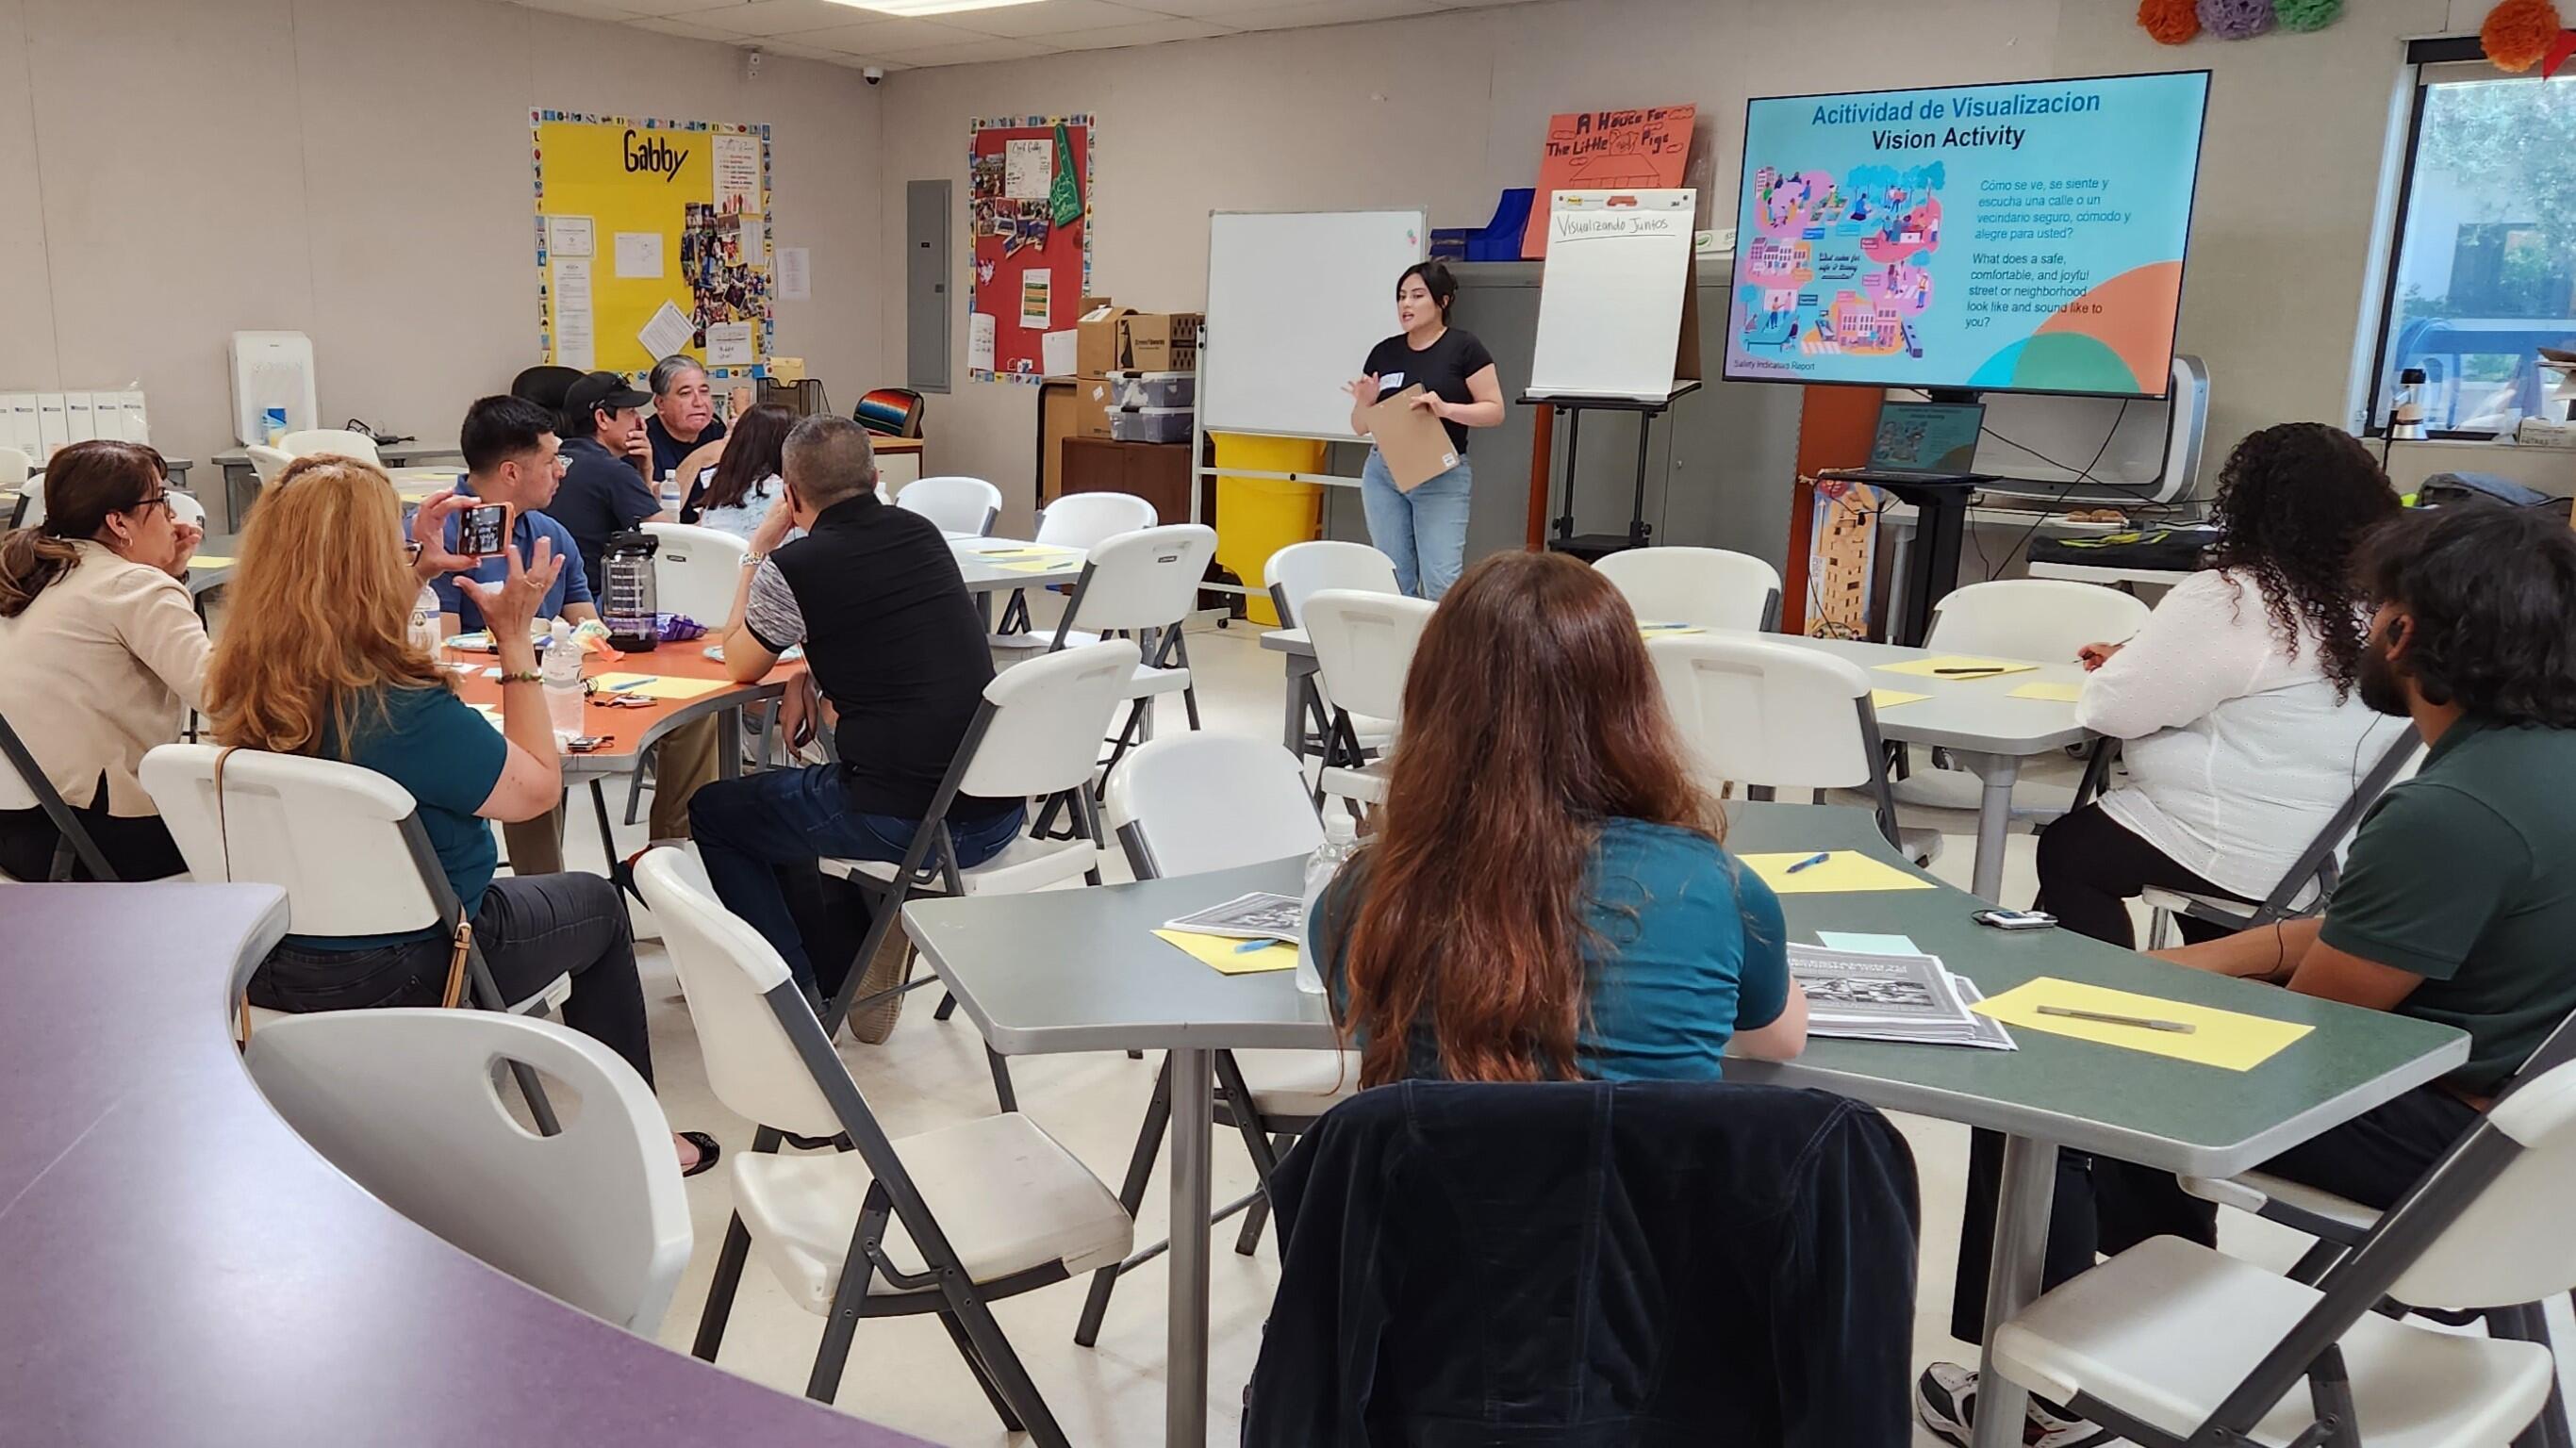 Karen facilitated a Community Pedestrian and Bicycle Training in Arvin